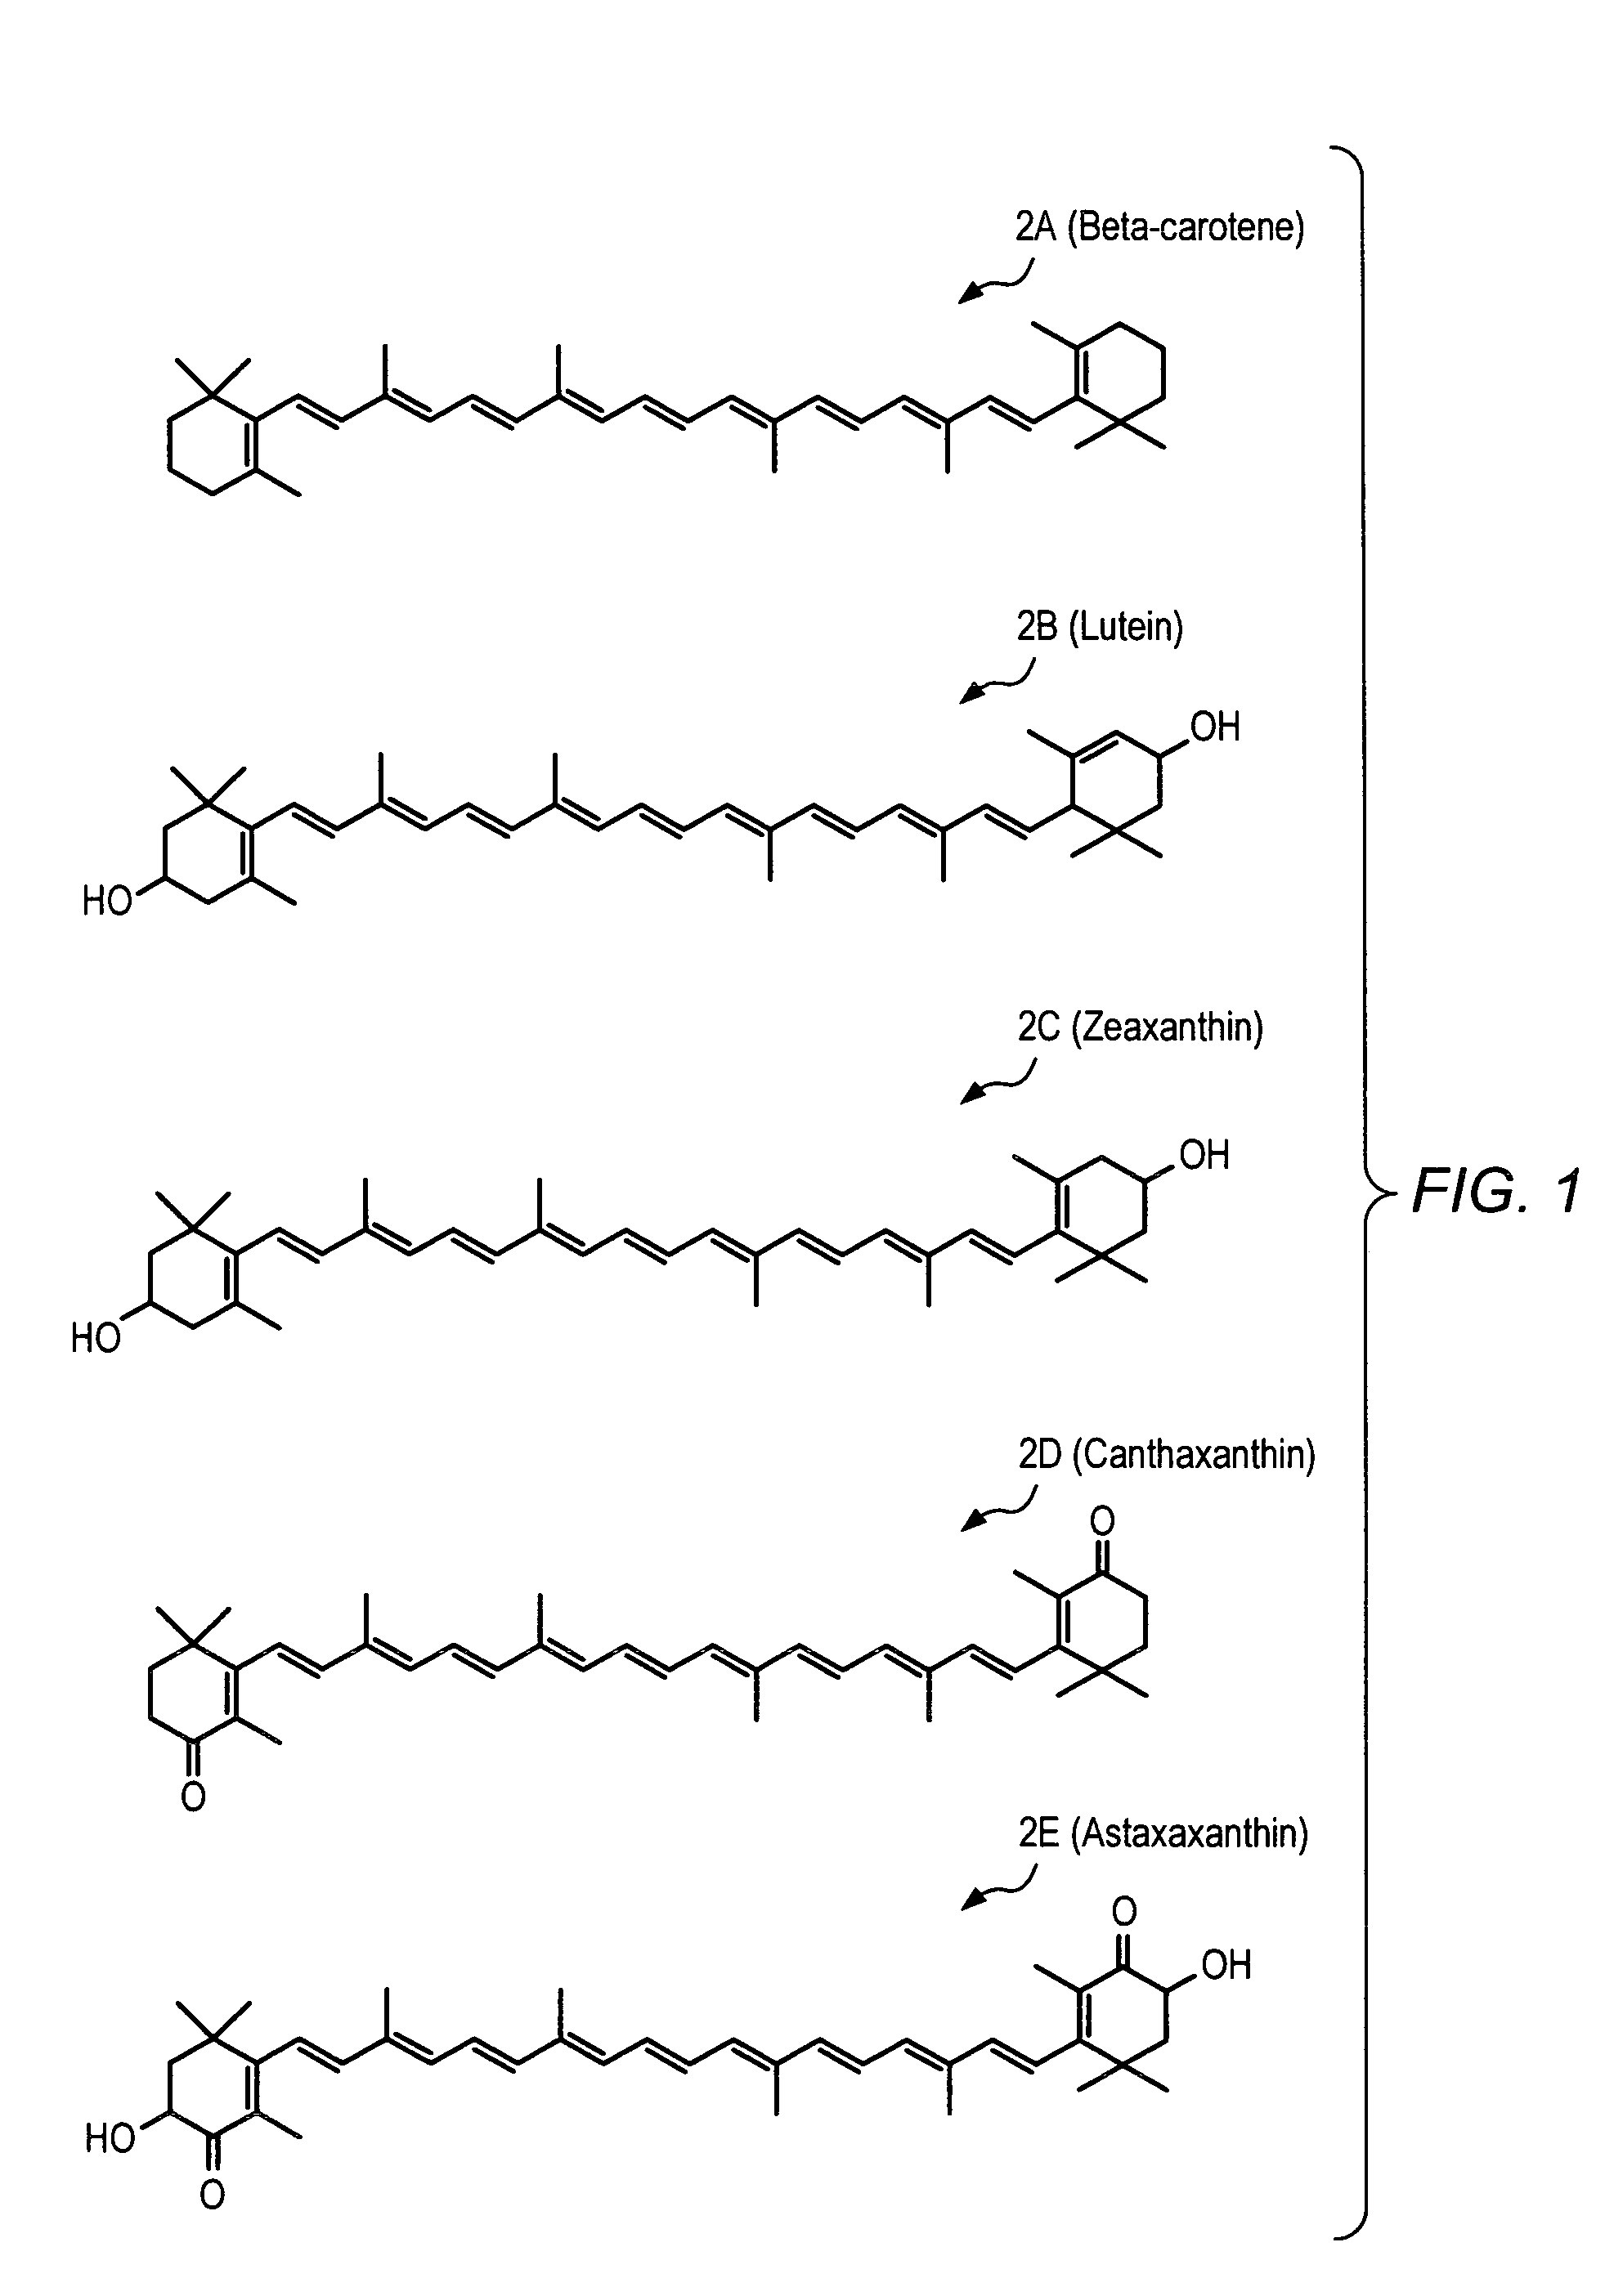 Carotenoid analogs or derivatives for controlling <i>connexin 43 </i>expression